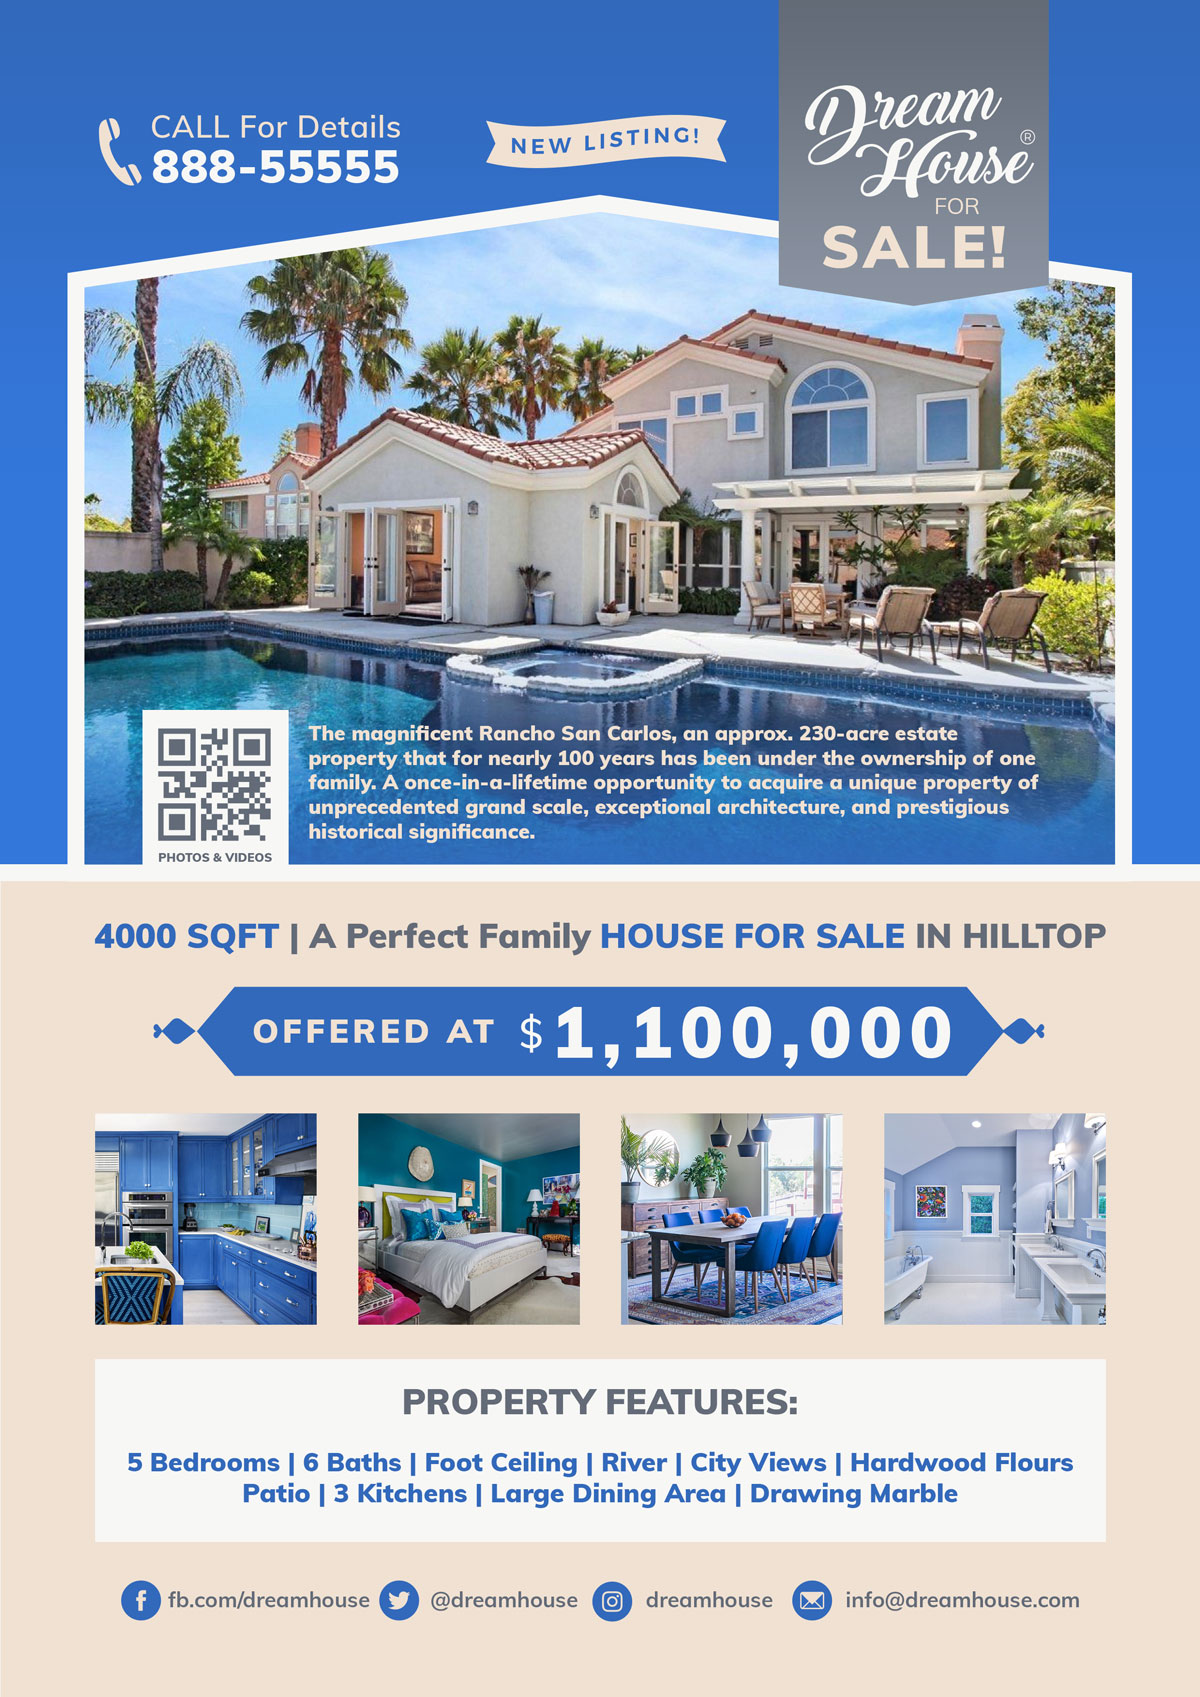 Free Real Estate / House for Sale Flyer Template in PSD - Designbolts Within Home For Sale Flyer Template Free